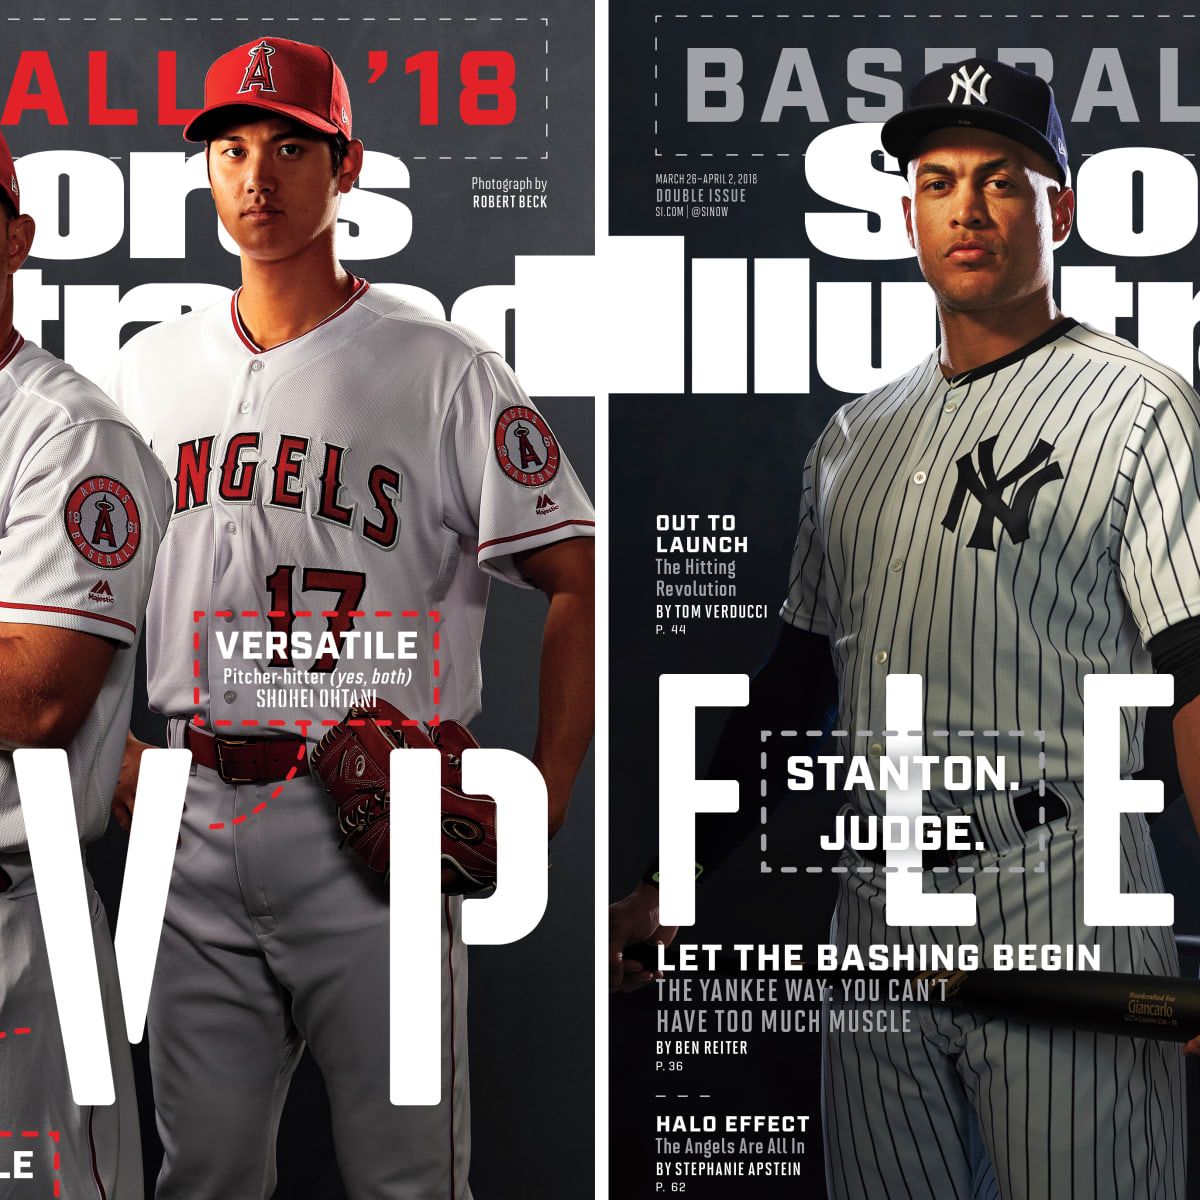 MIKE TROUT SHOHEI OHTANI SPORTS ILLUSTRATED MAGAZINE MAR 26 2018 PREVIEW 